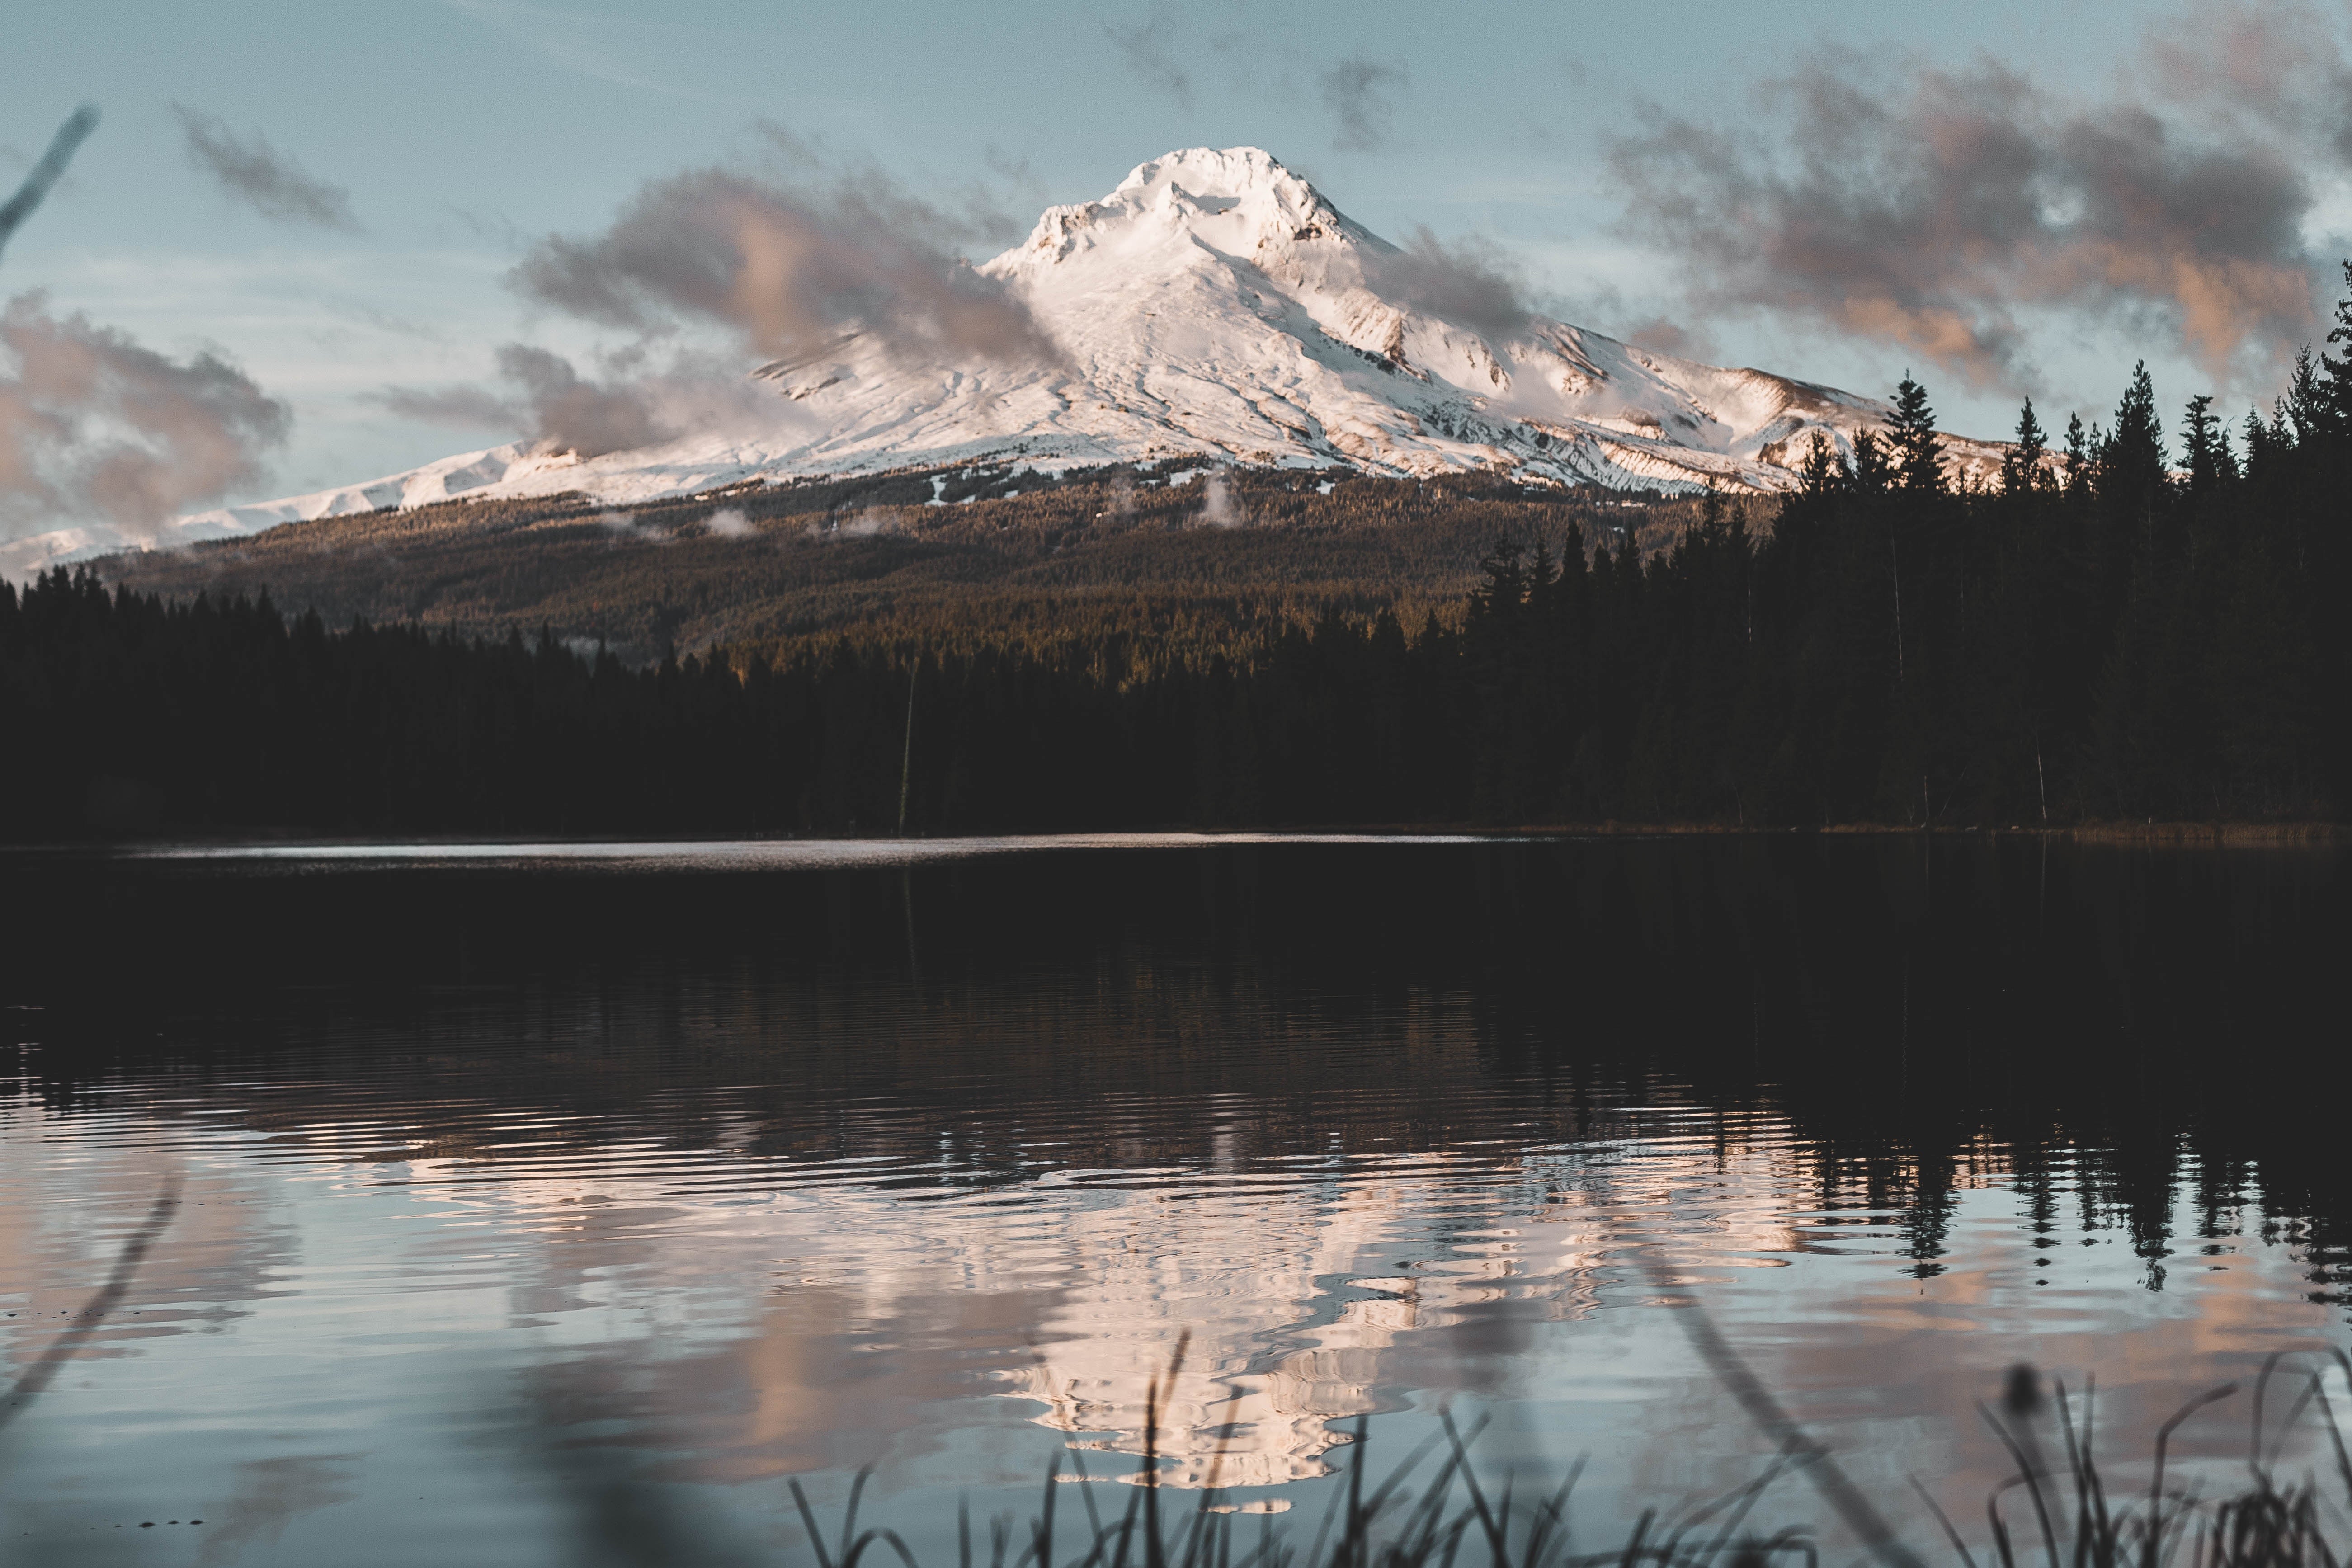 Wallpapers of the Month – Oregon Summer | Abe Kislevitz